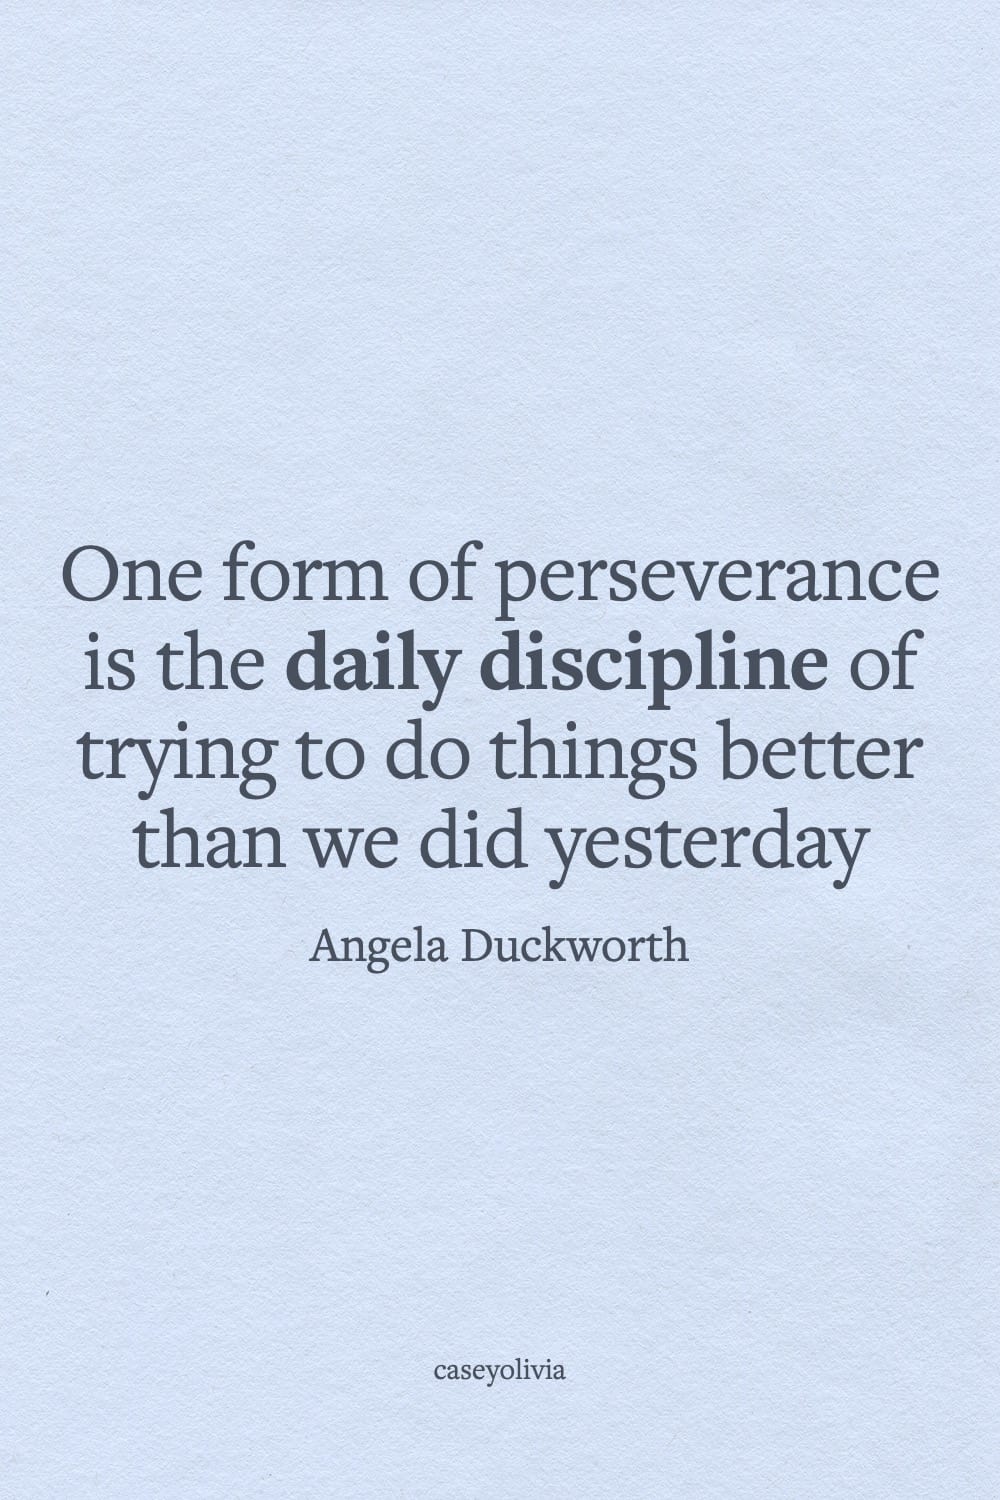 angela duckworth daily discipline quote image about perseverance